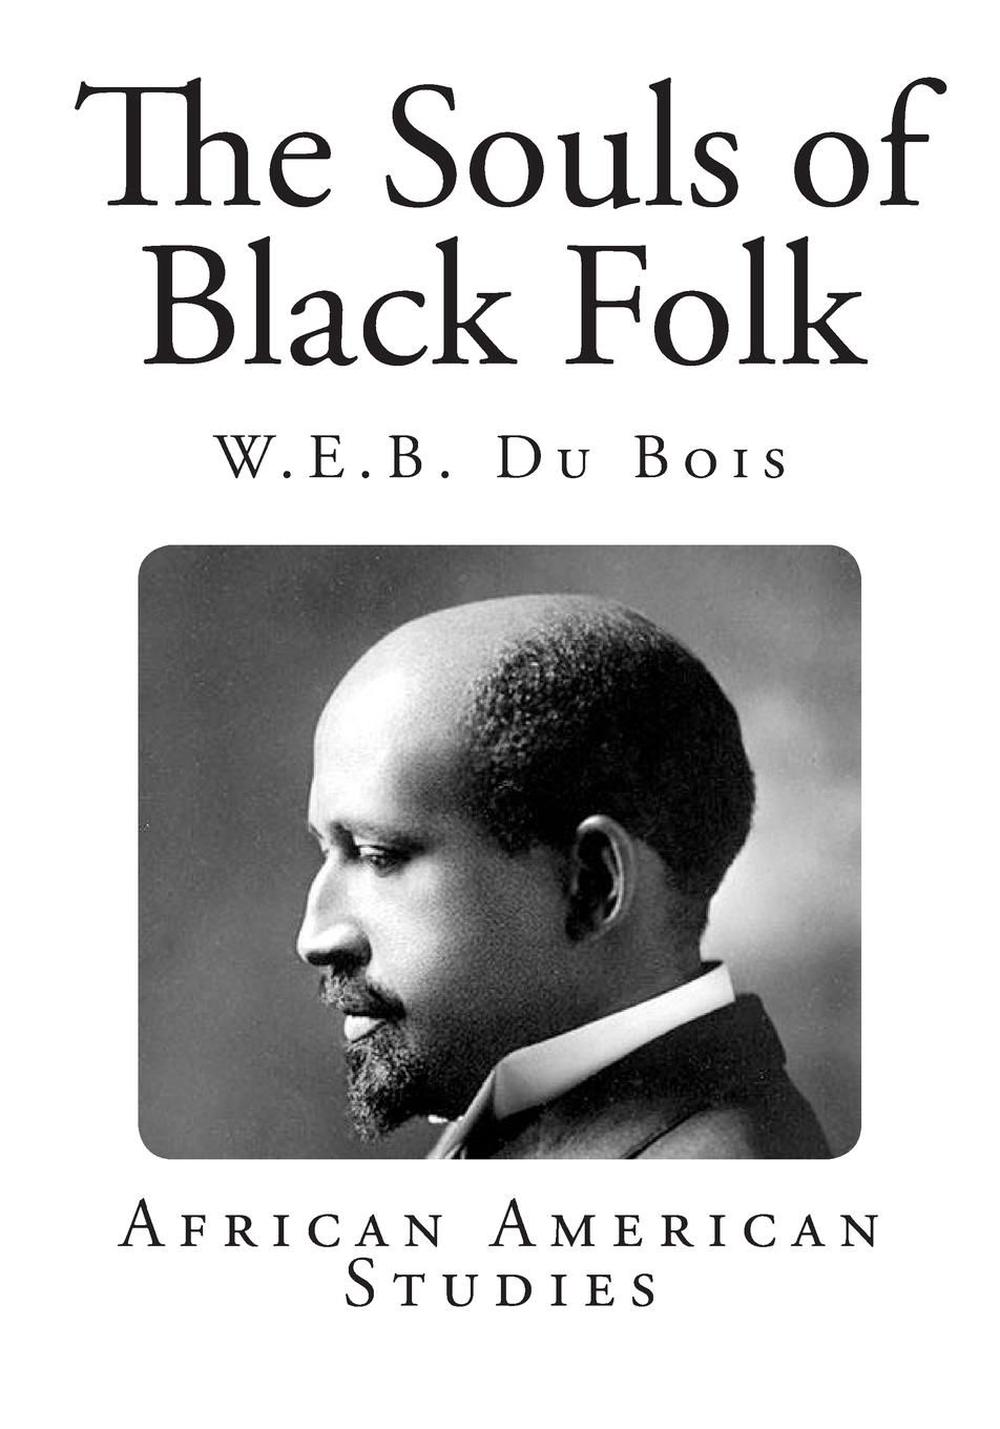 the souls of black folk significance